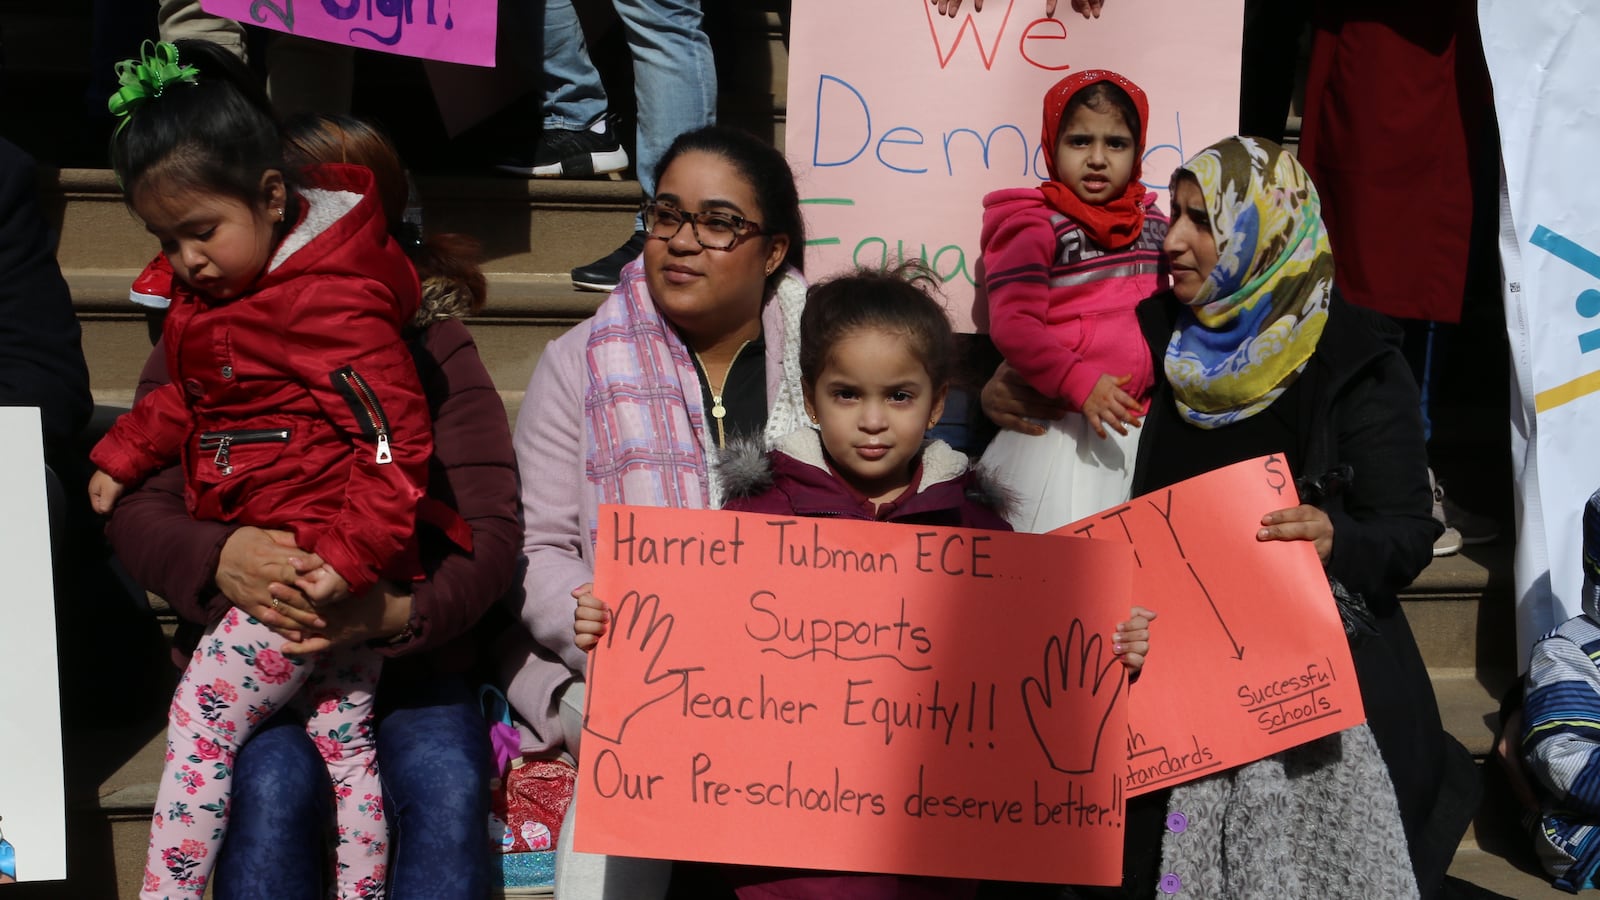 Pre-K teachers rallied at City Hall to demand that educators in community organizations are paid equally to education department teachers on March 20, 2019.